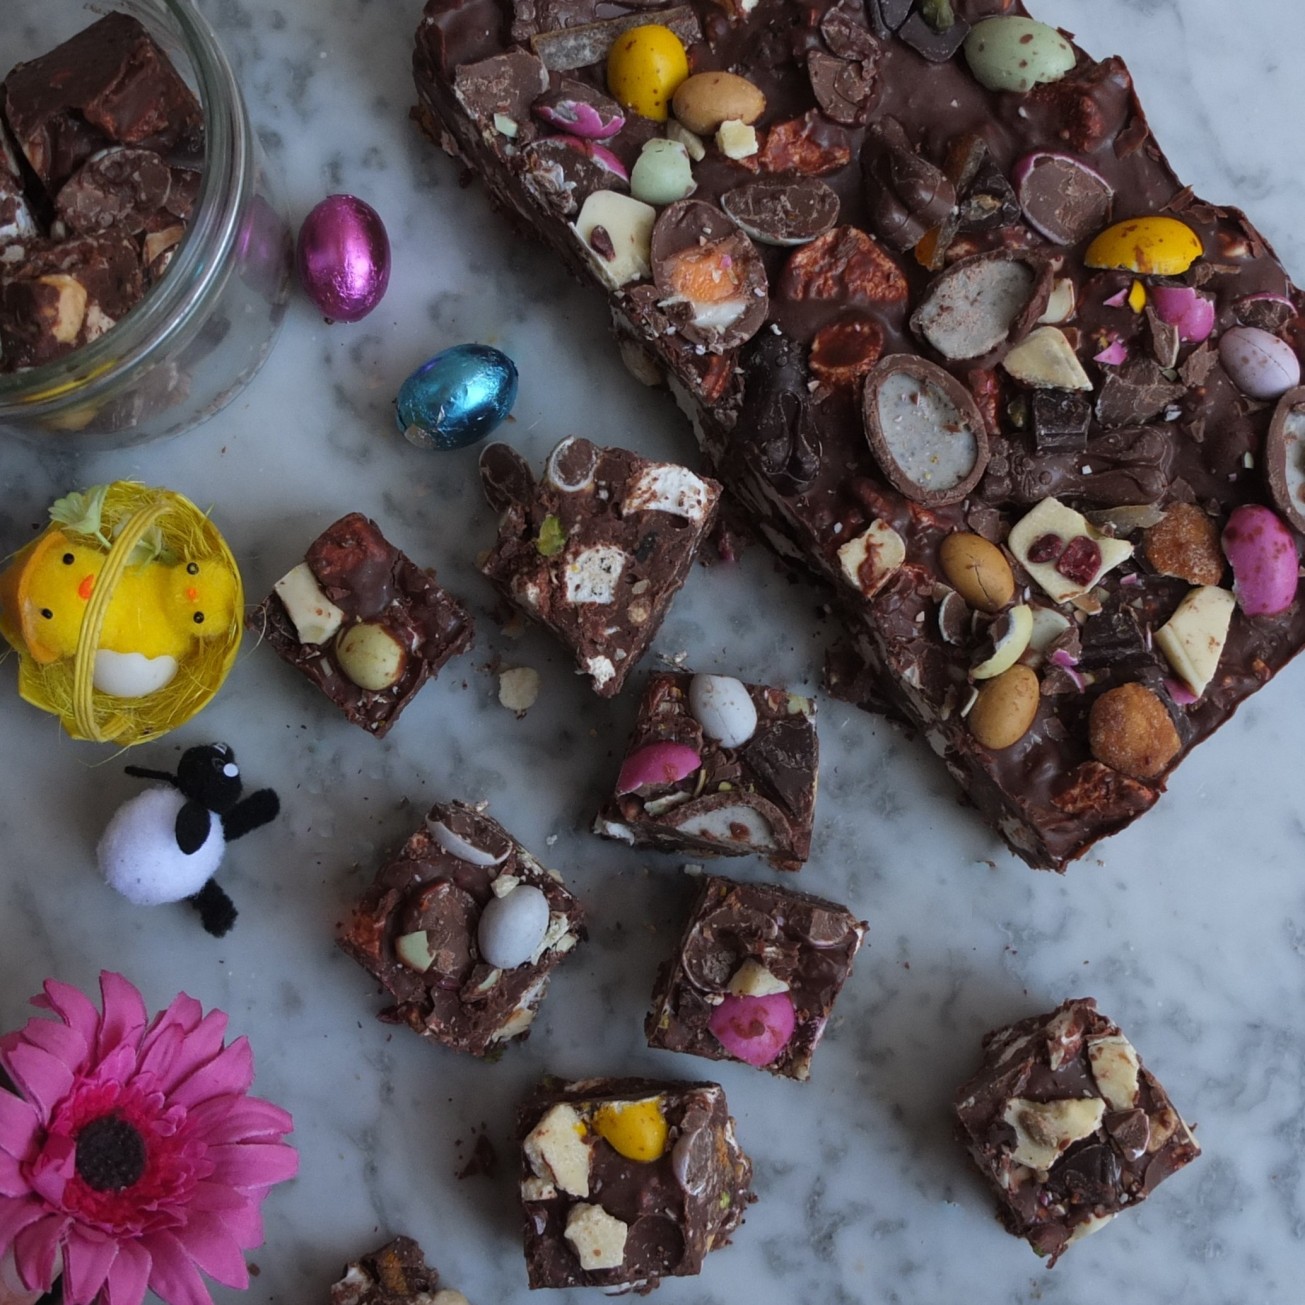 Gourmet rocky road with Easter stuff